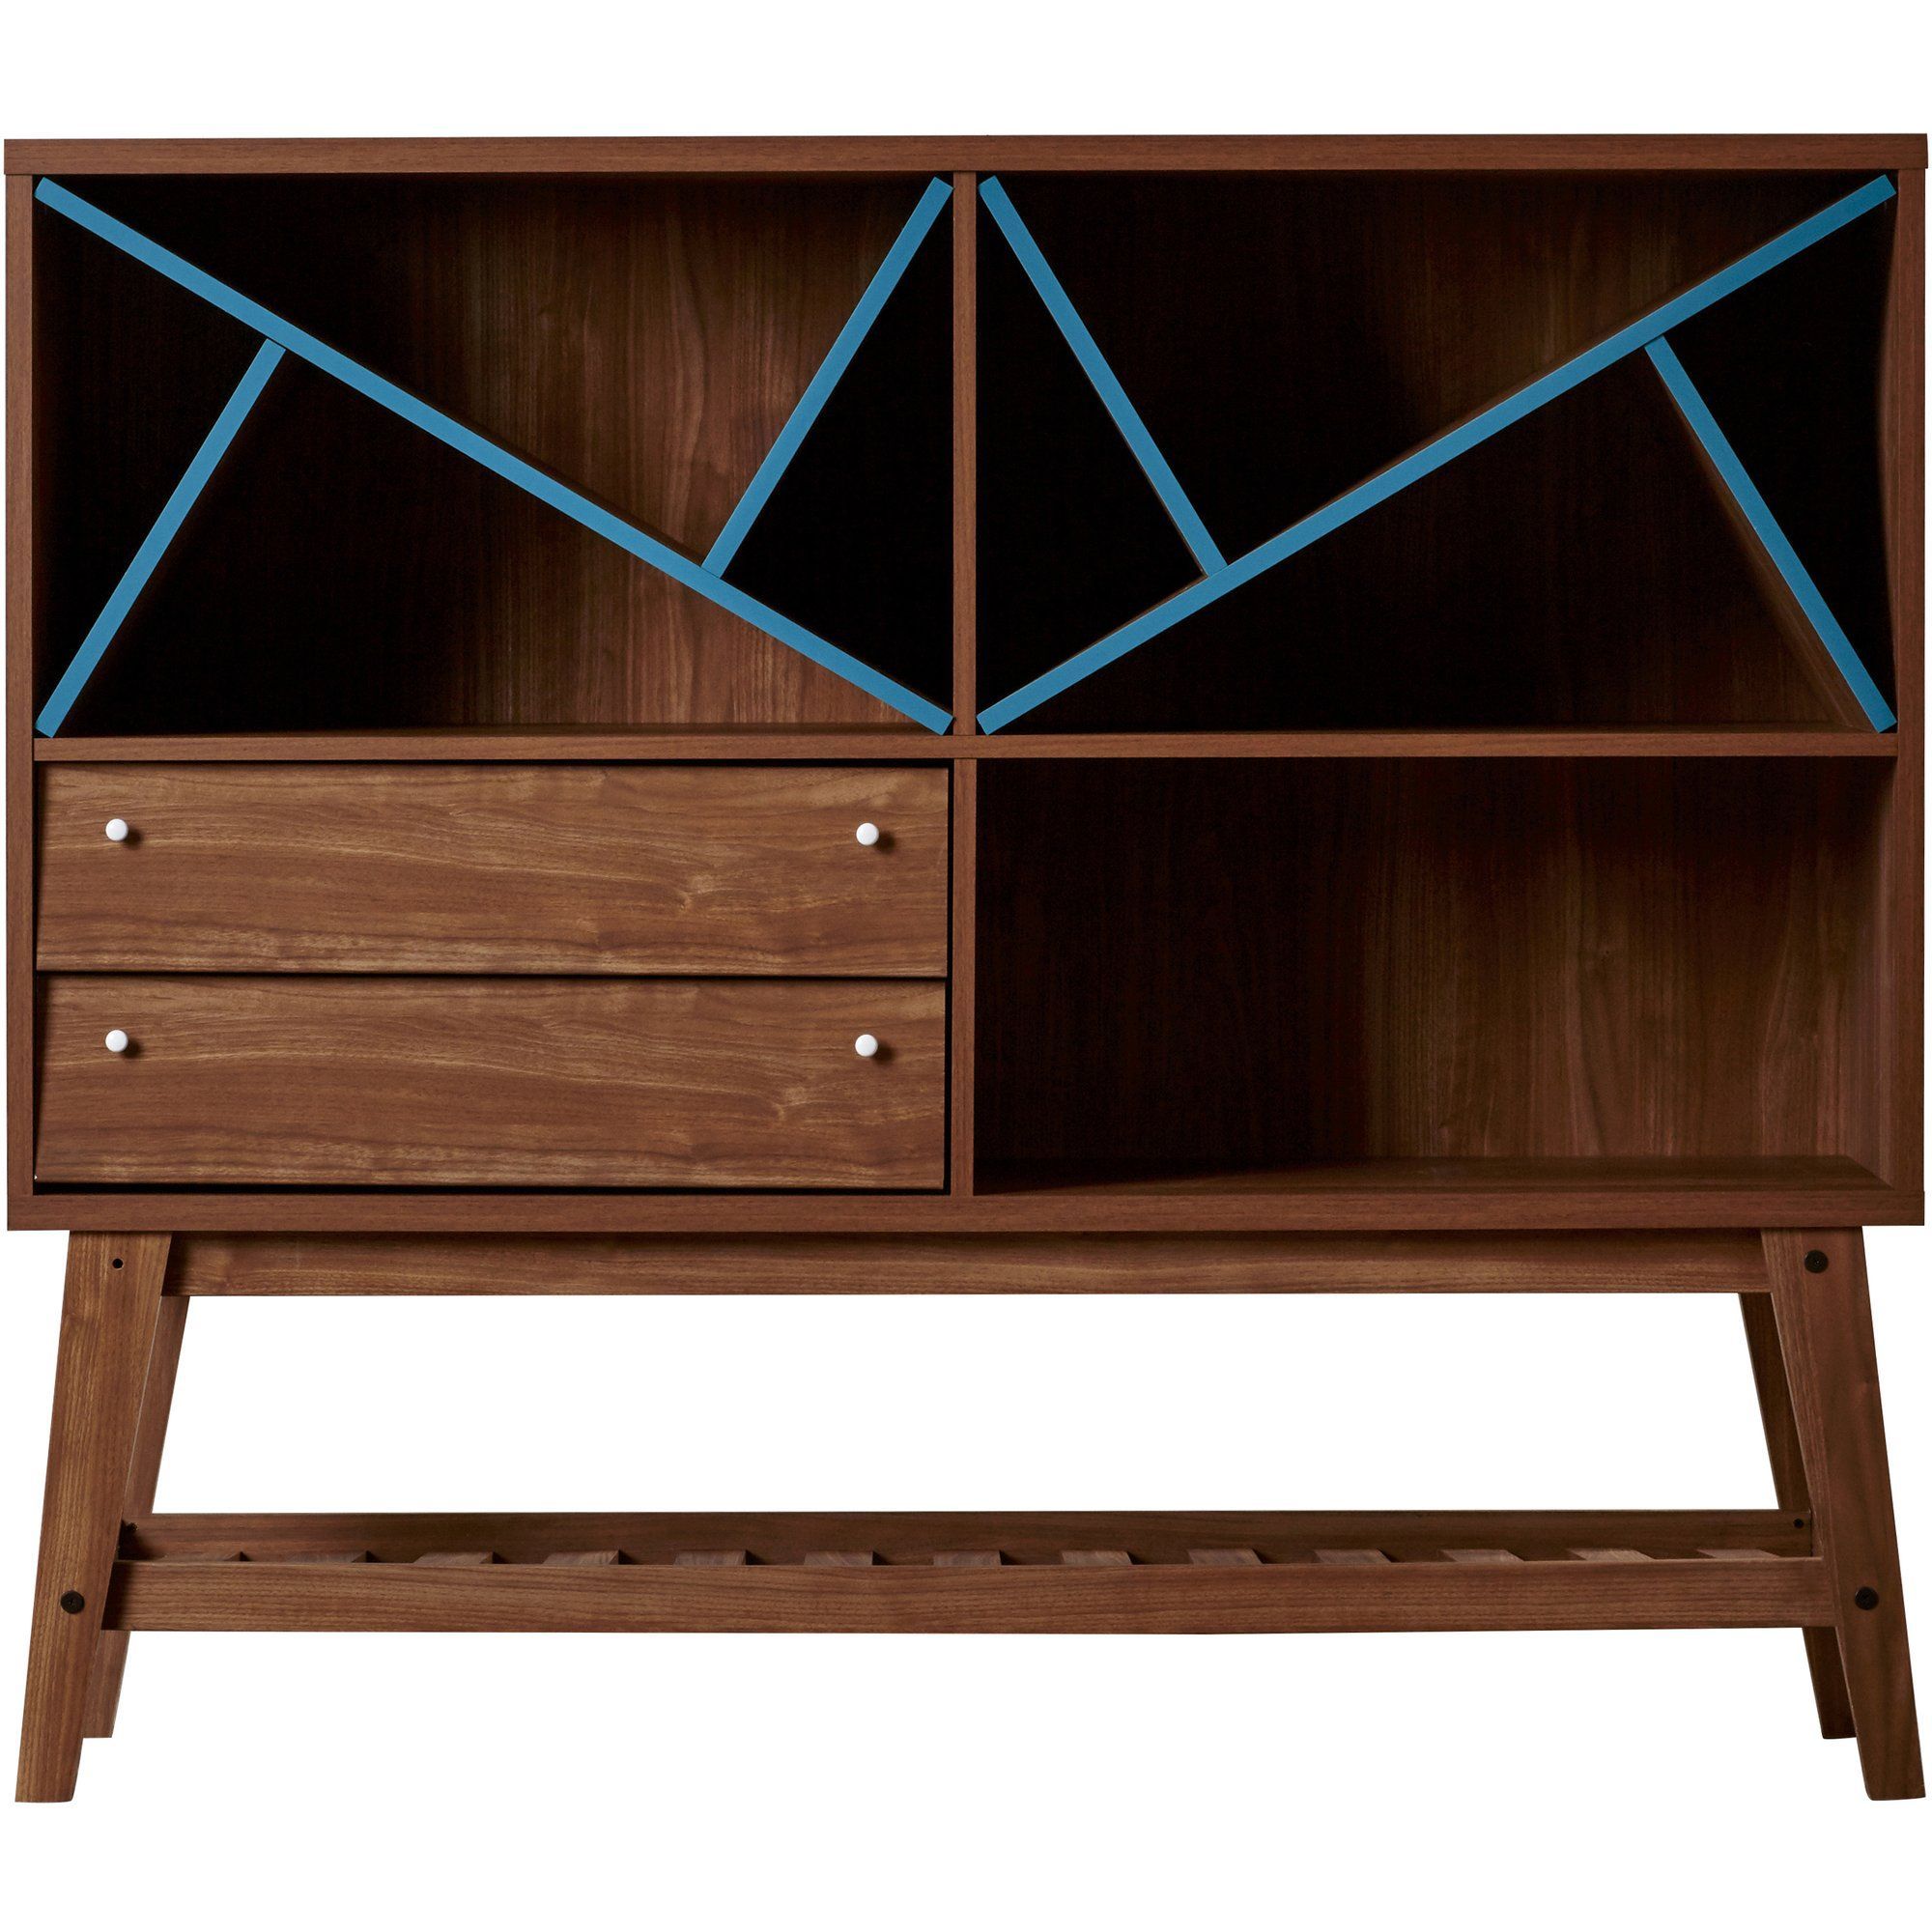 Longley Sideboard | For The Home Regarding Most Popular Longley Sideboards (View 10 of 20)